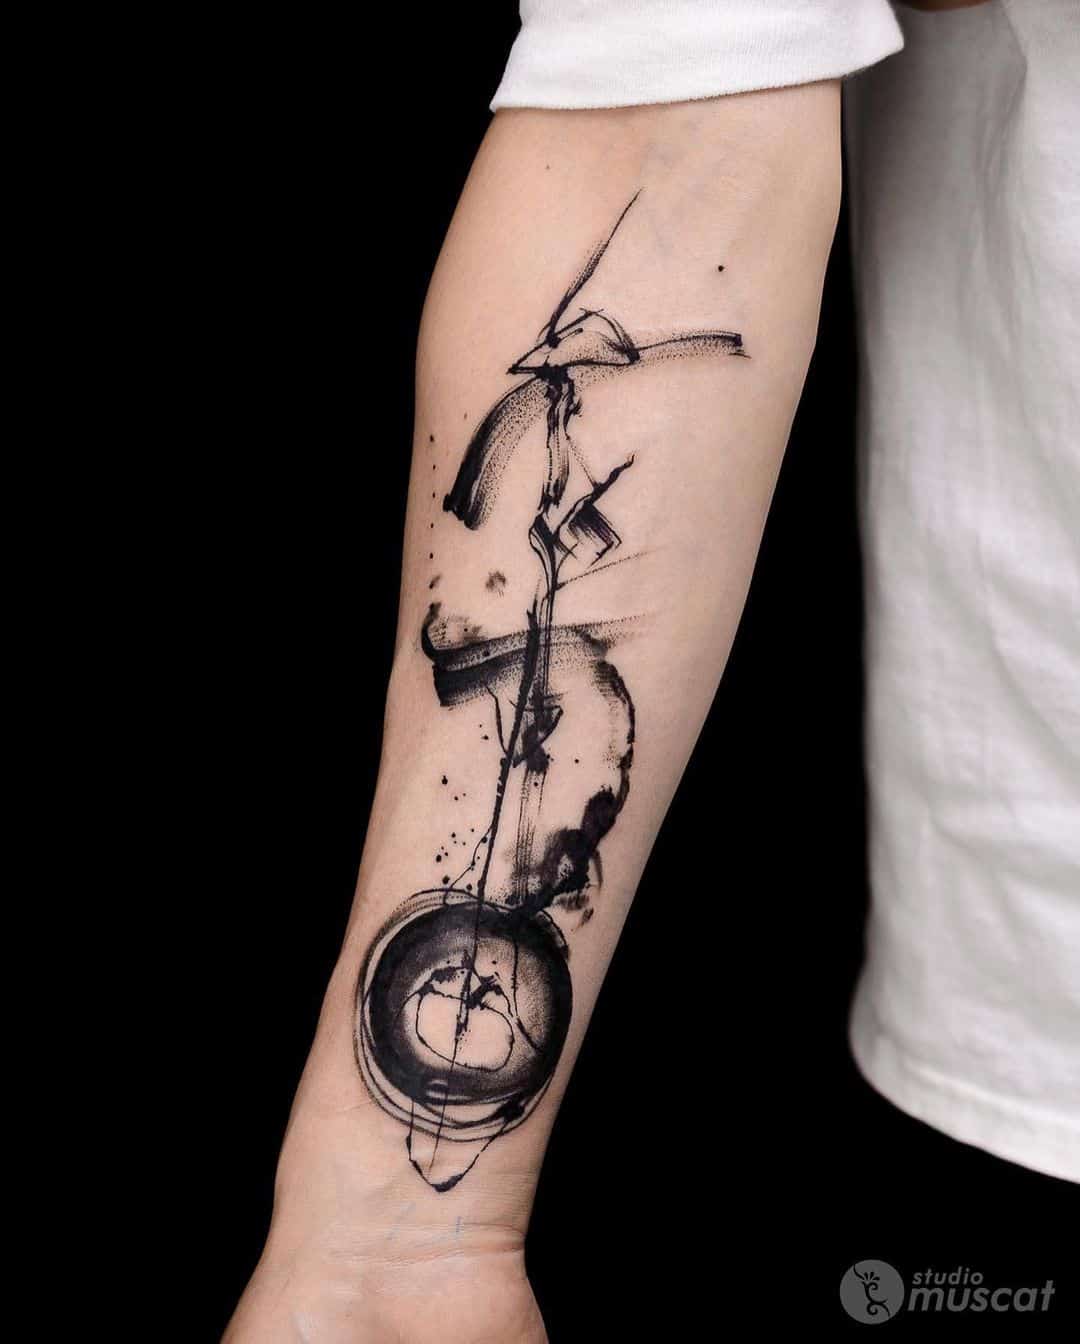 Amazing dark inked abstract tattoo on forerm by studiomuscat